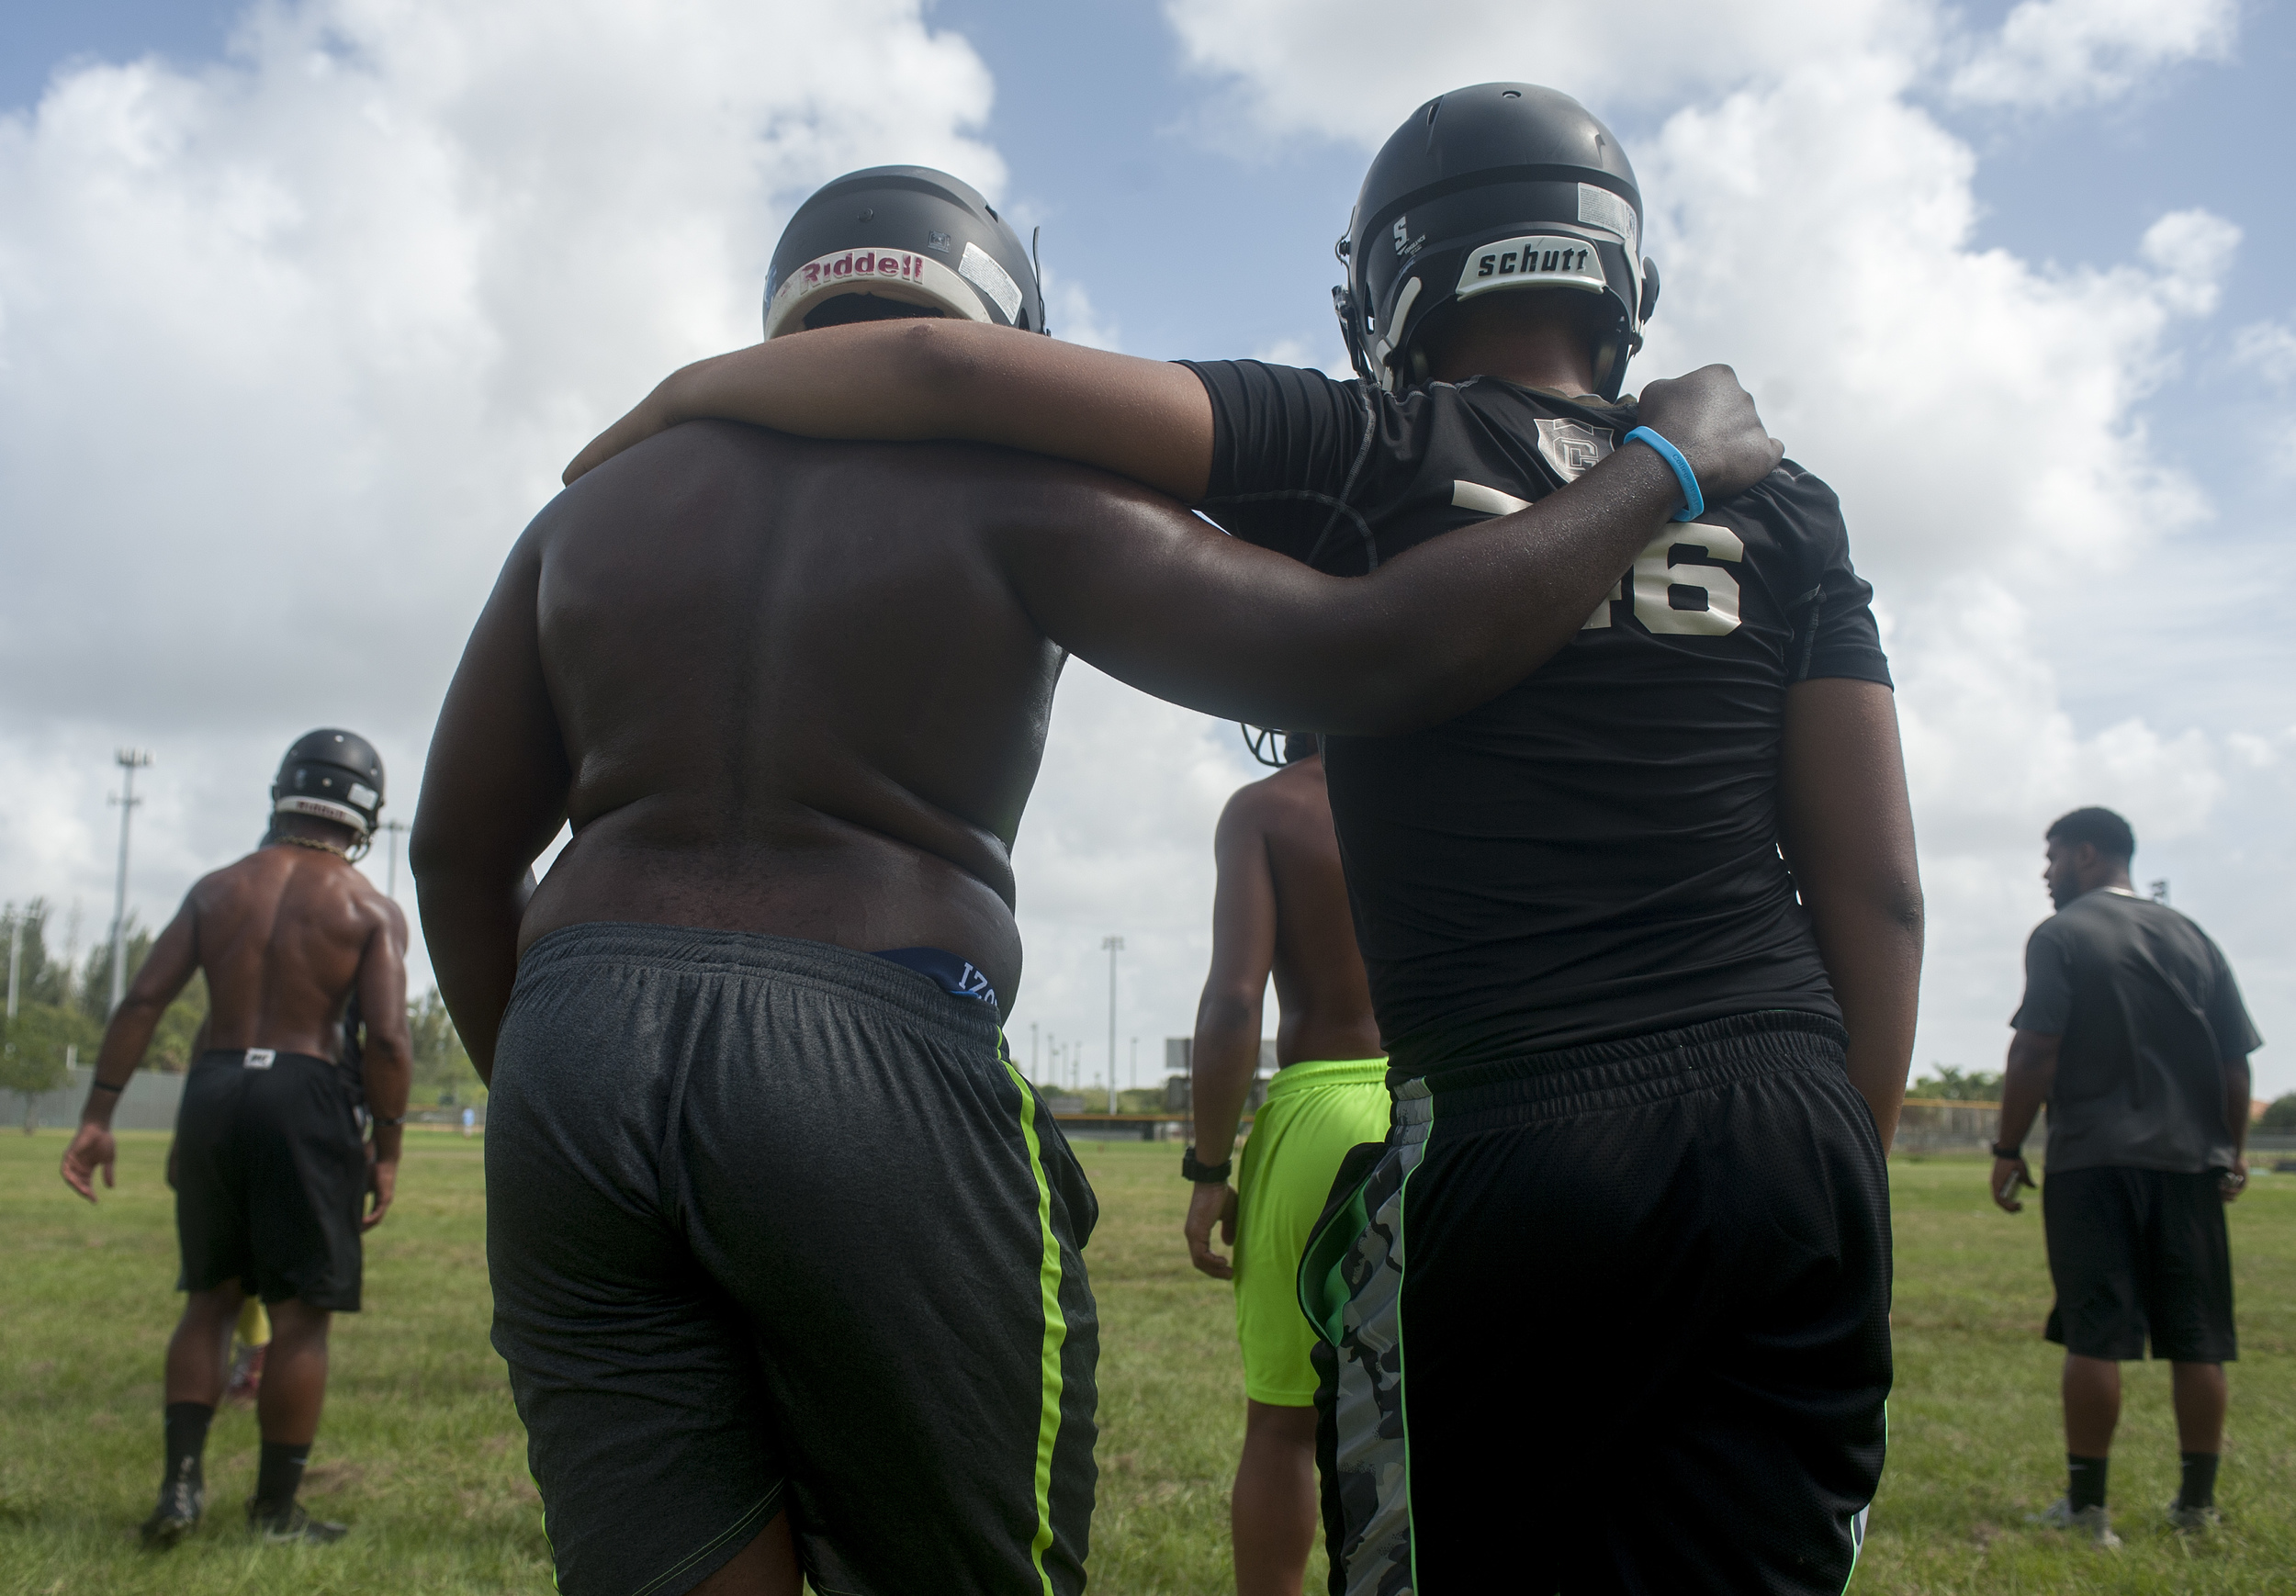  Flanagan high school football teammates help each other get through condition drills during the first practice of the high school football season at Flanagan High School on Monday, Aug. 1, 2016. The reigning state champions look to repeat again desp